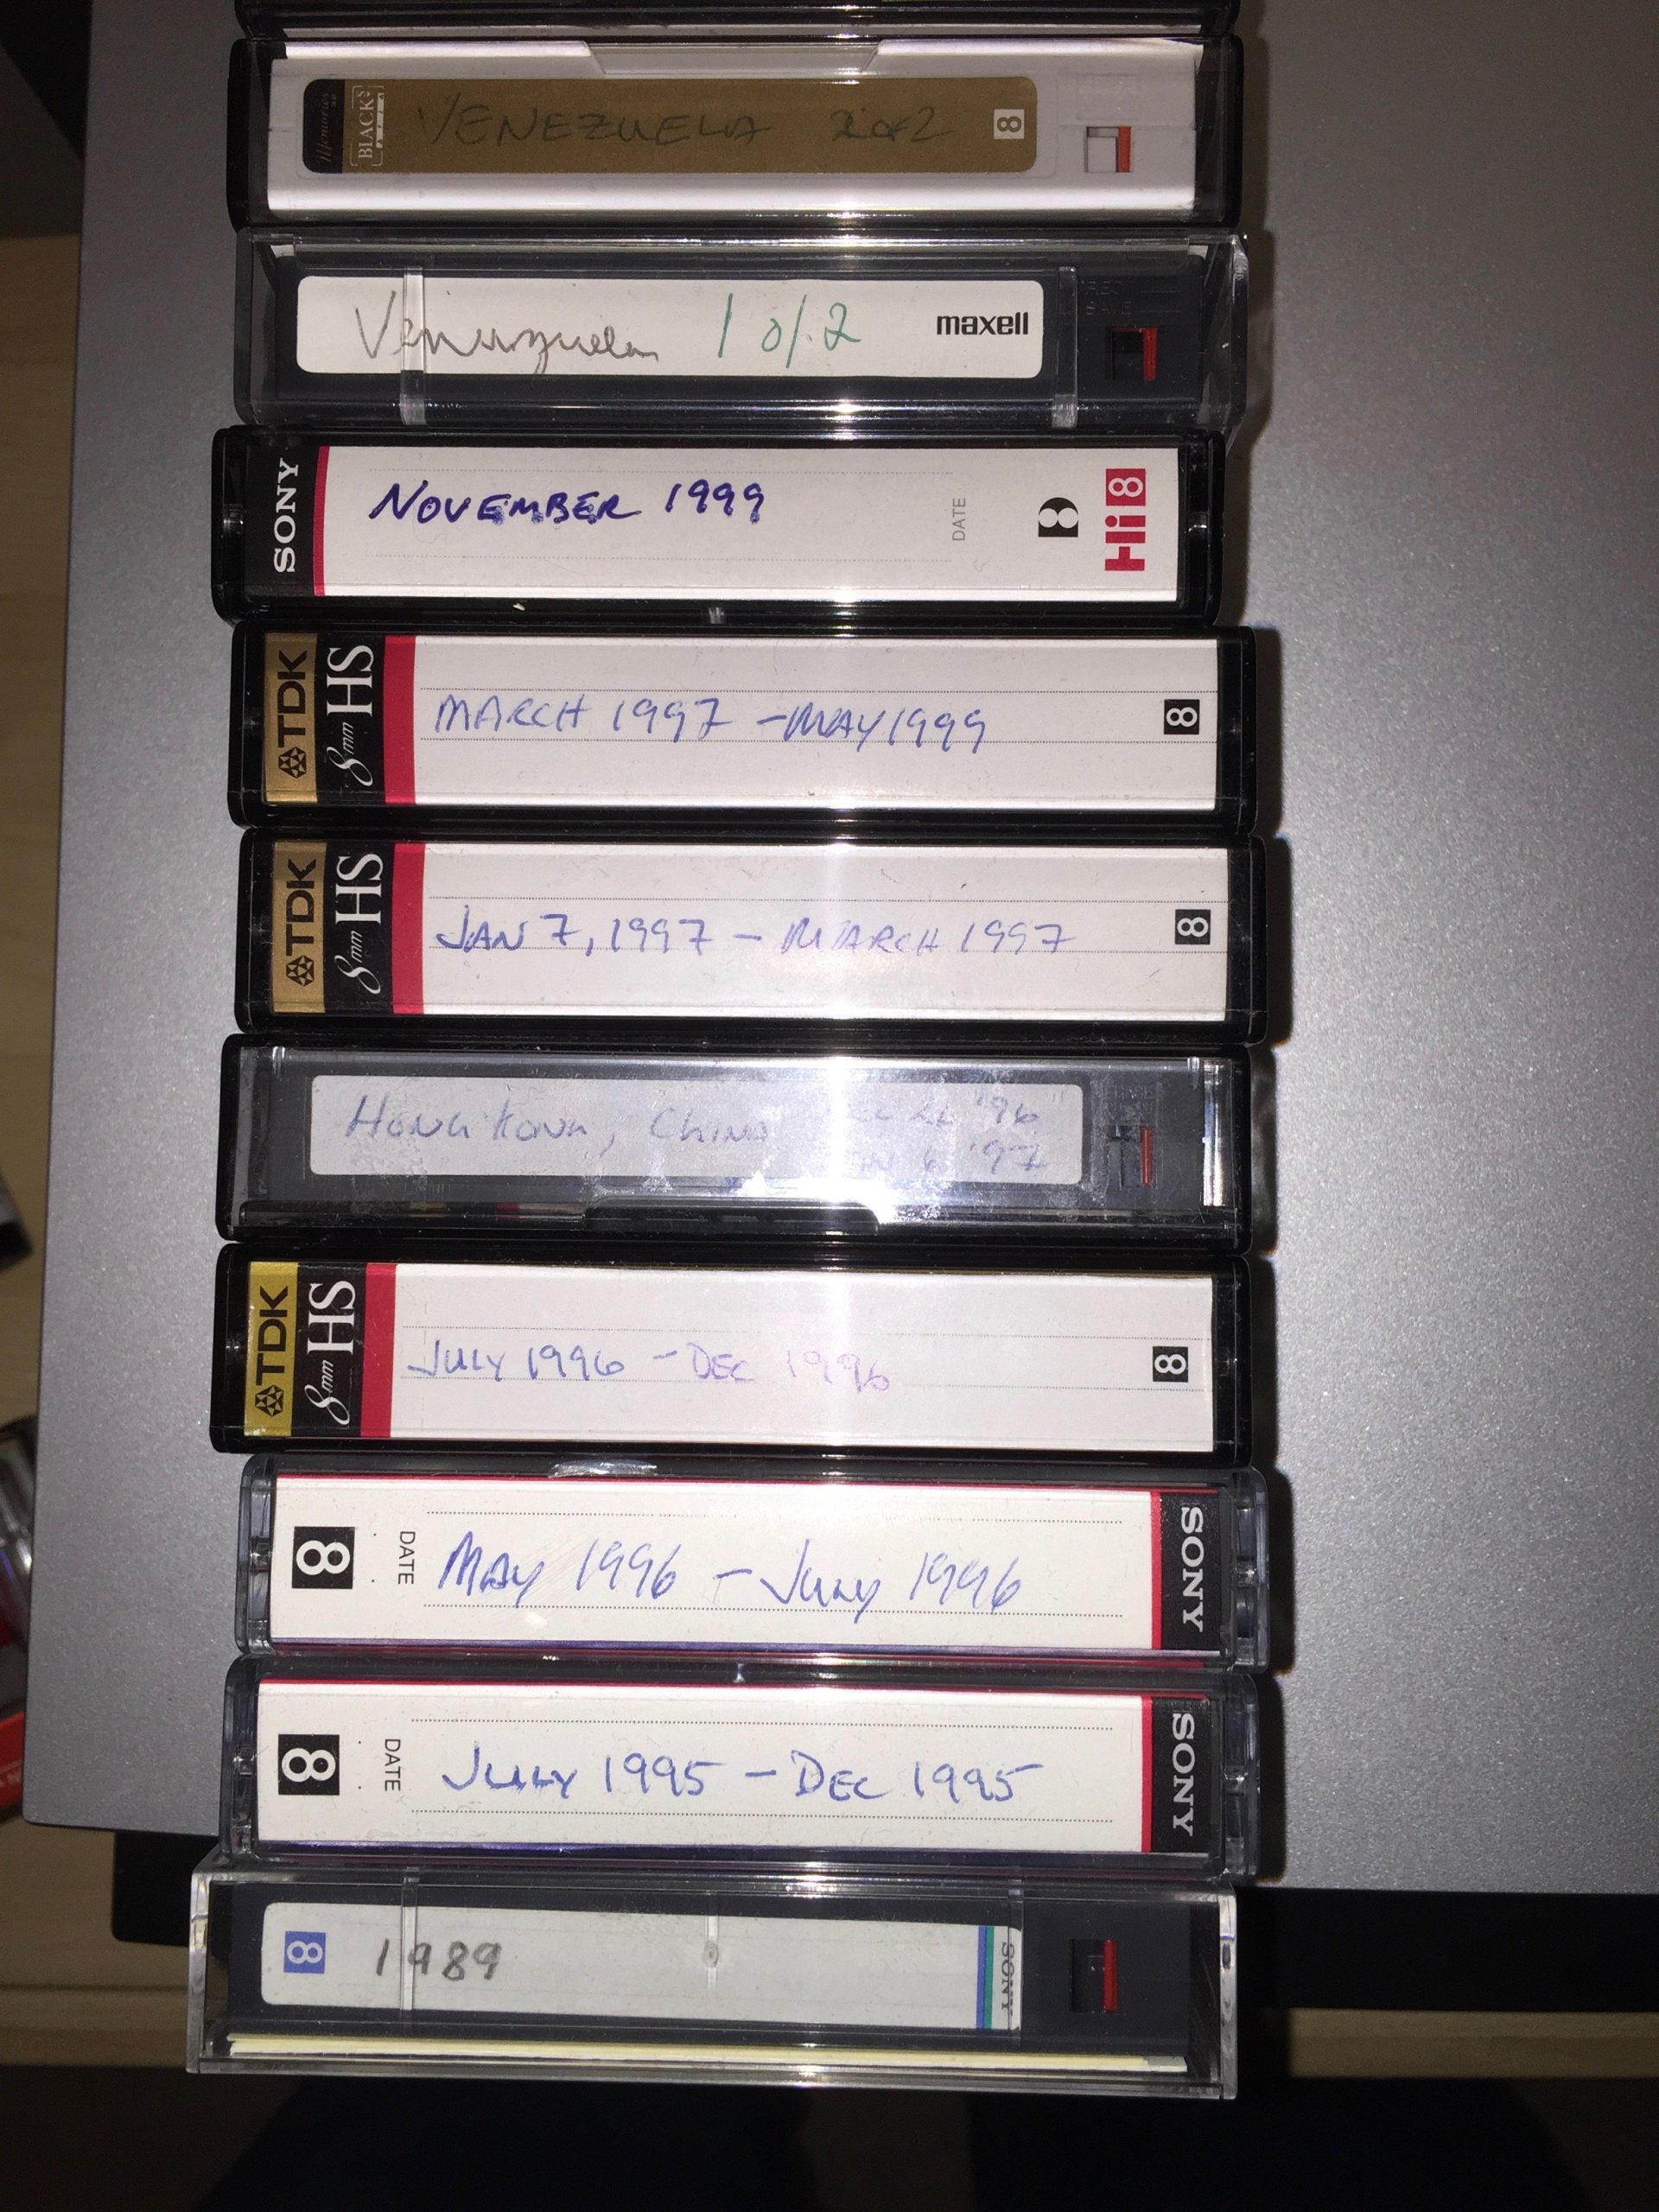 Video Tapes starting from 1989